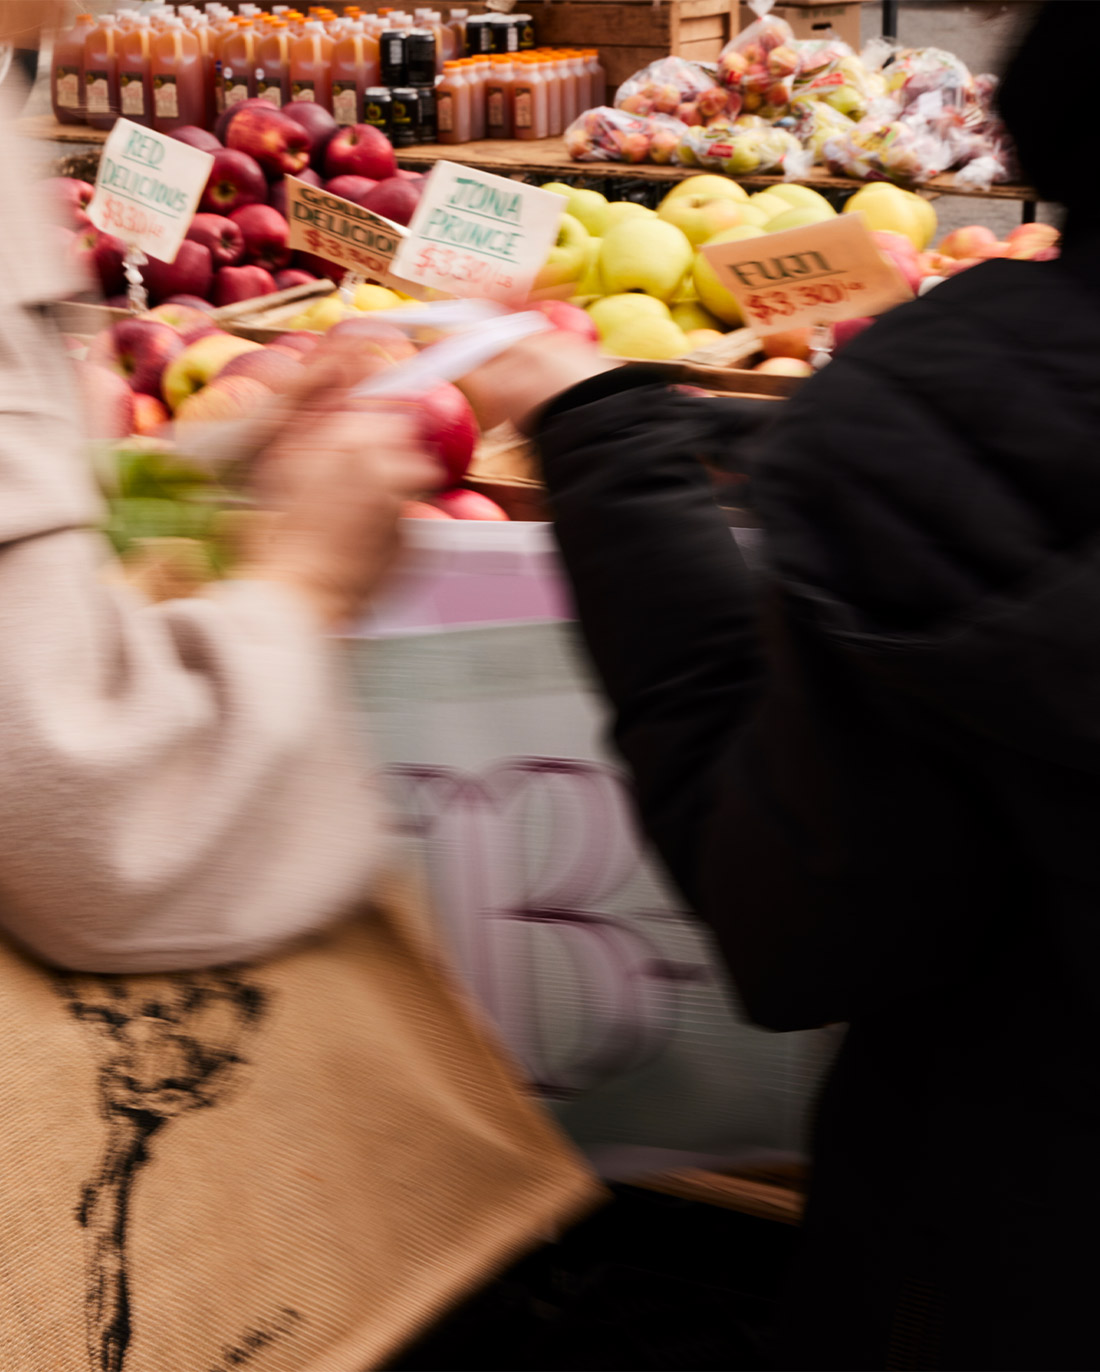 A customer at a bustling market stall, bag in hand, selects fresh fruit, with a variety of colorful produce and price signs in the background.